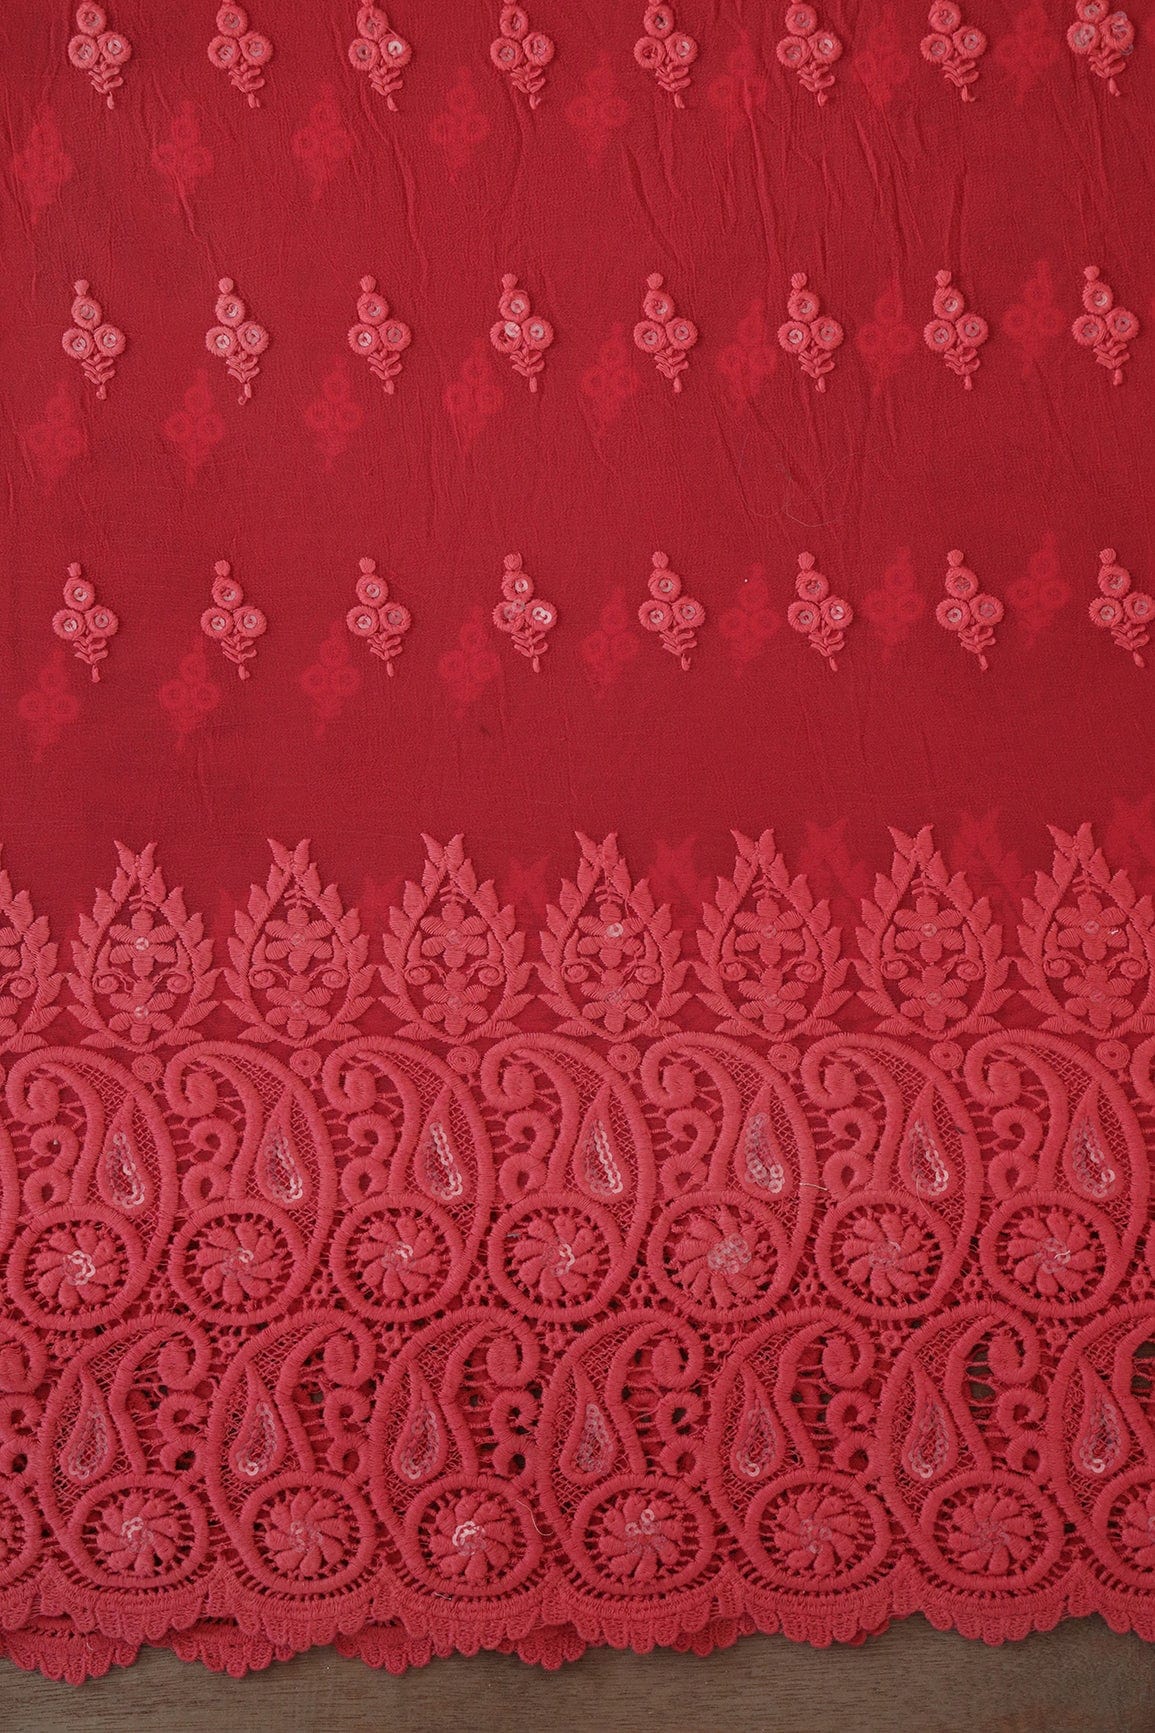 doeraa Embroidery Fabrics 3 Meter Cut Piece Of Red Thread Floral Embroidery On Red Georgette Fabric